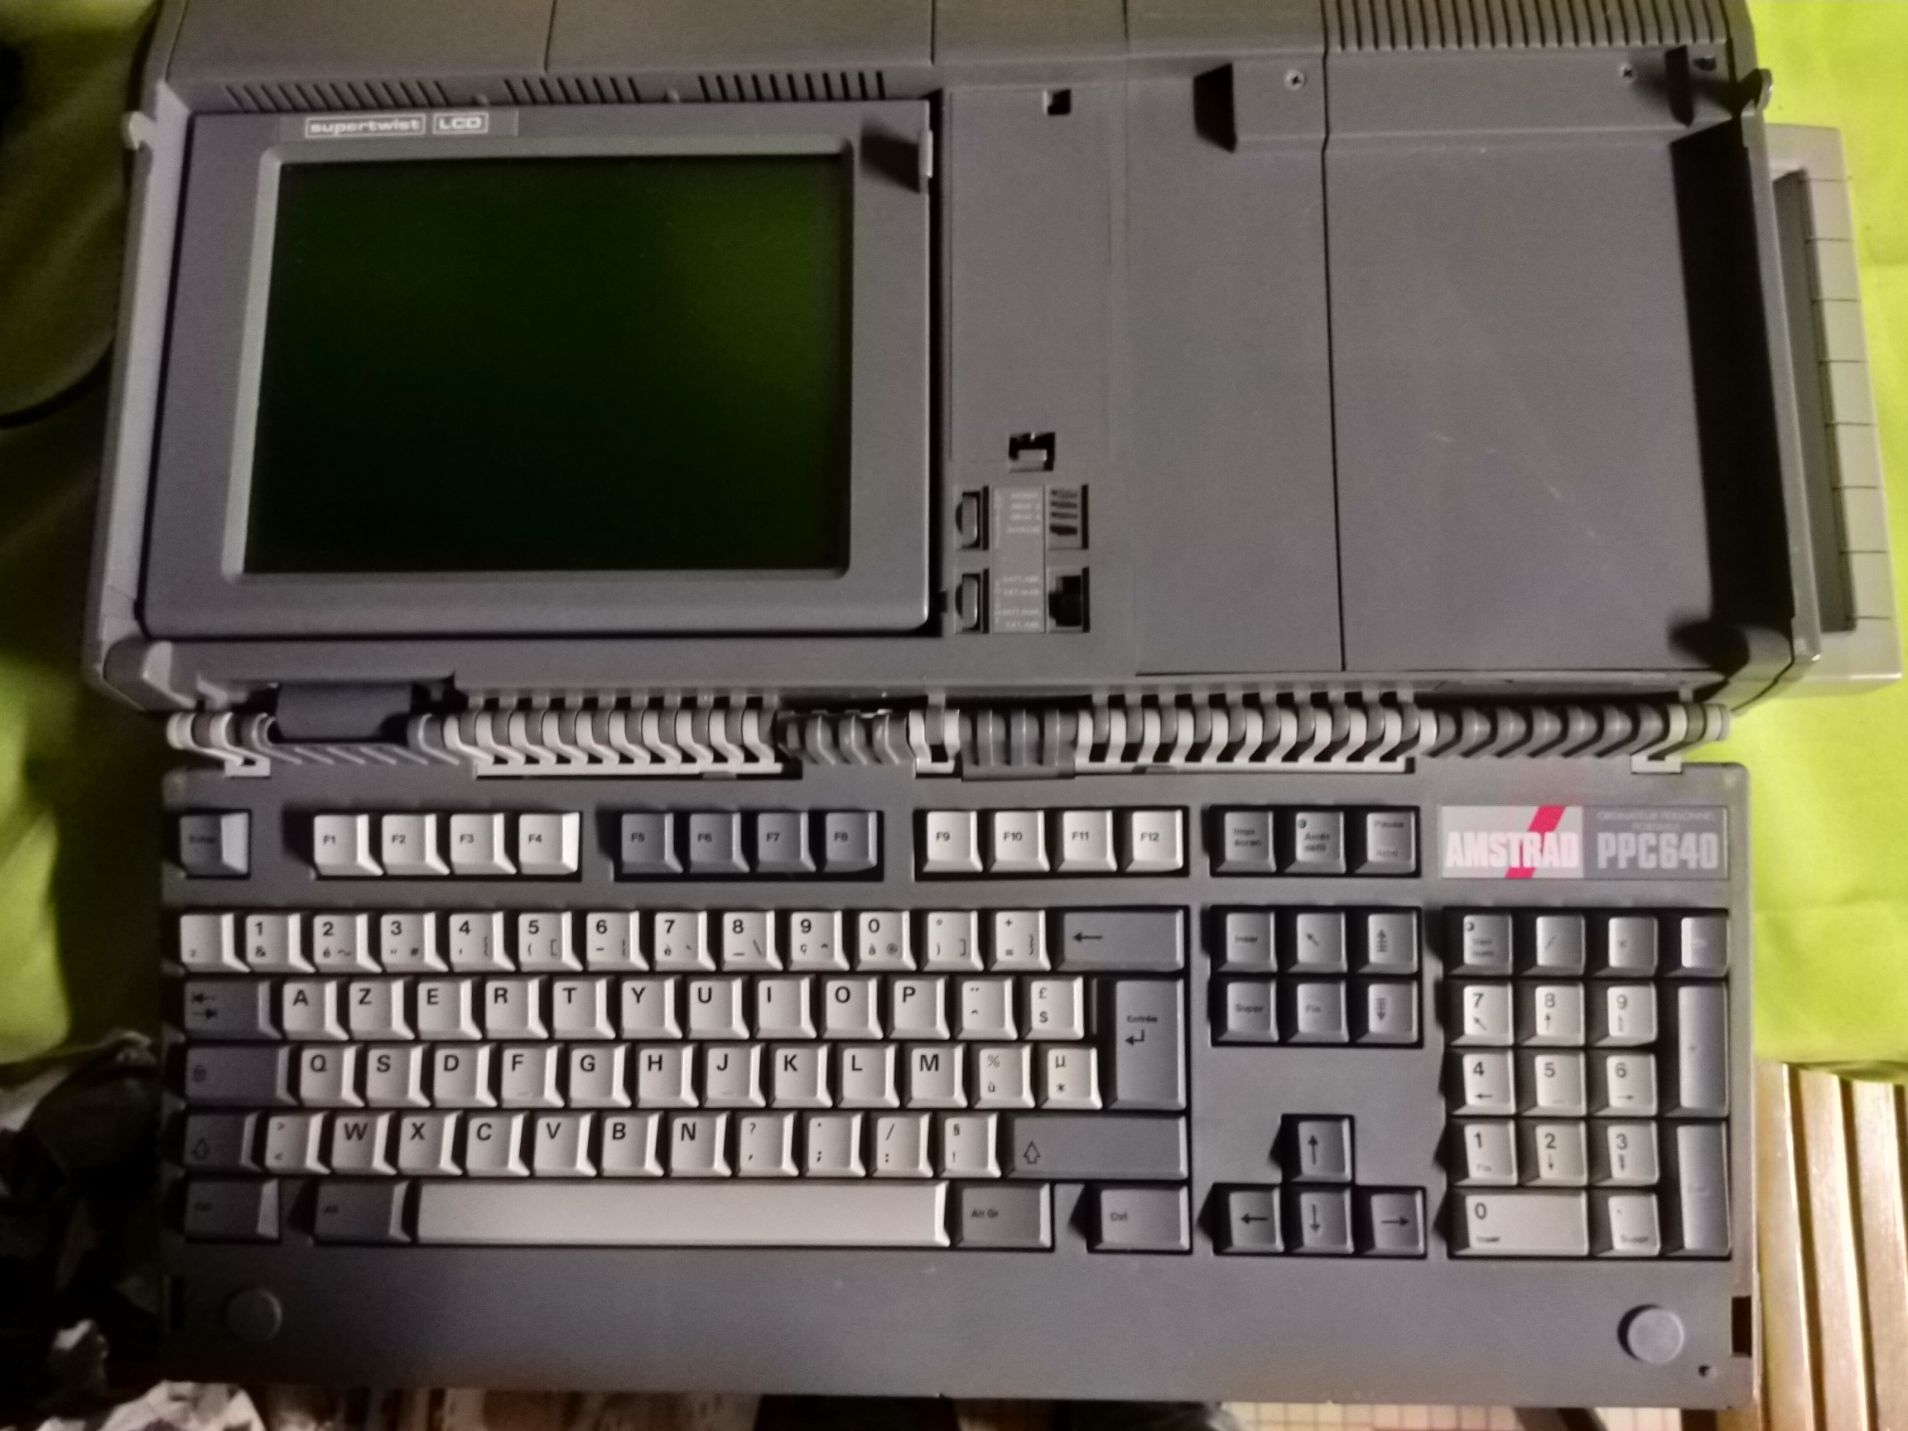 Amstrad PPC 640 opened, up view